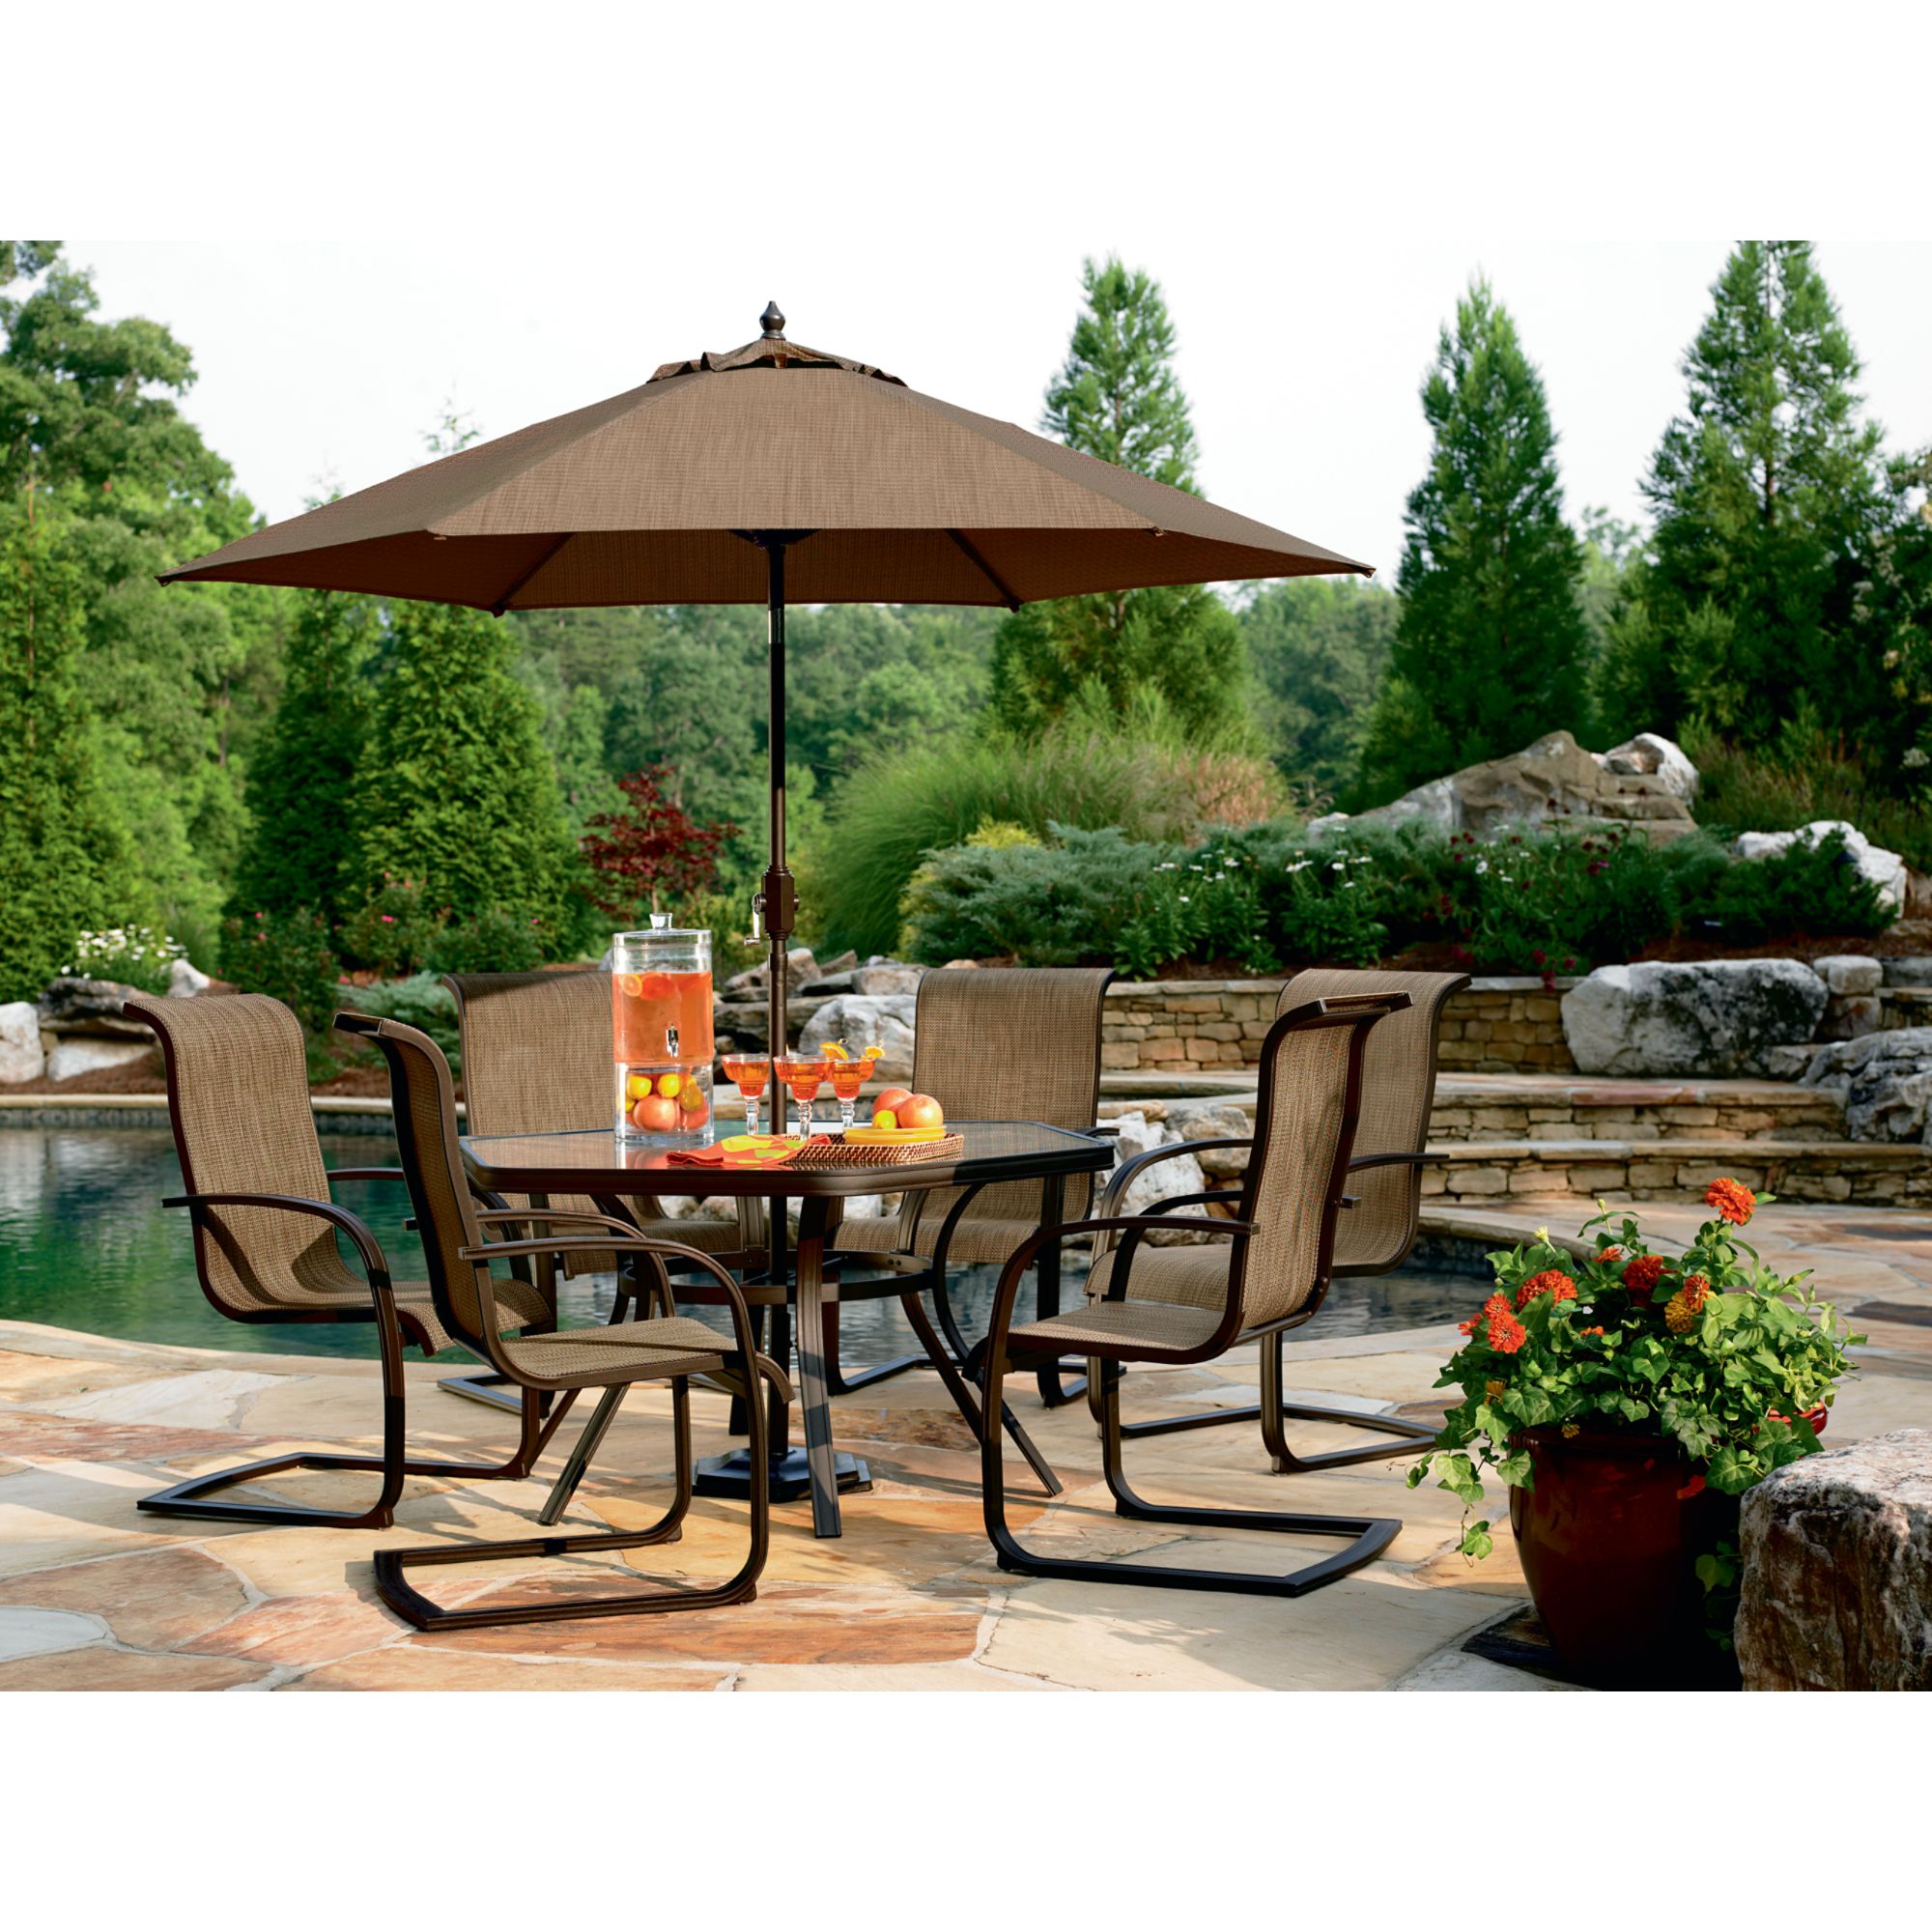 Shop for clearance in Patio Furniture at Sears.com including Patio ...